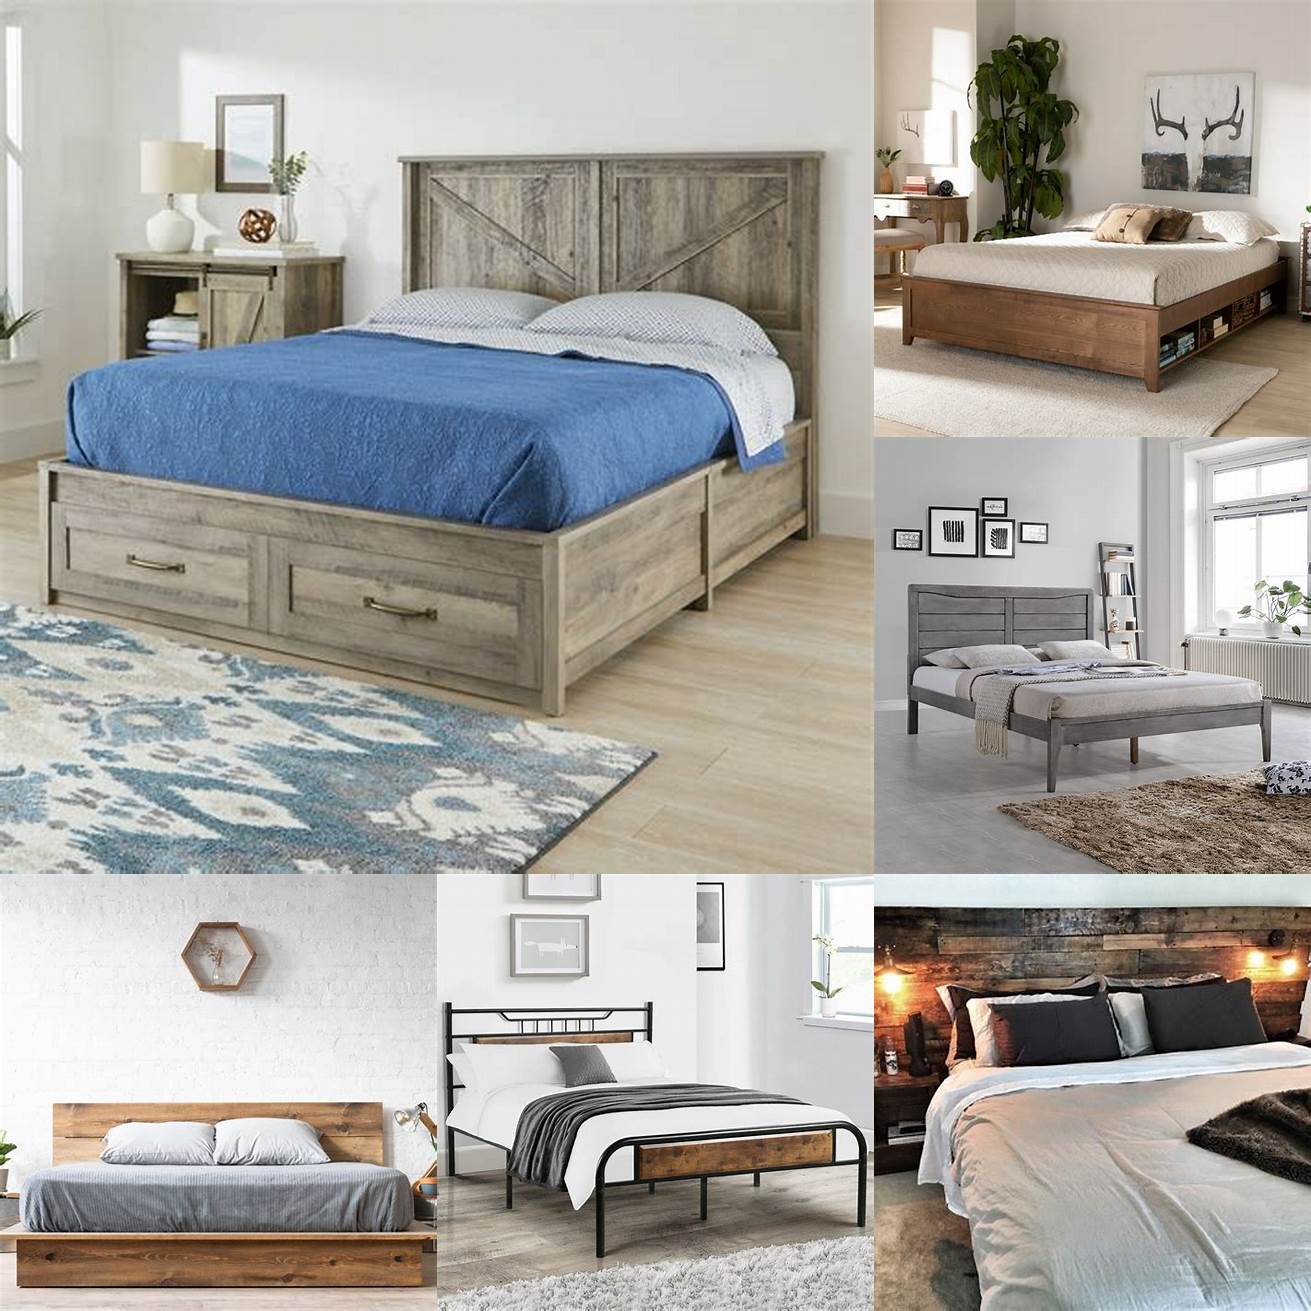 A rustic queen bed platform with a wooden headboard